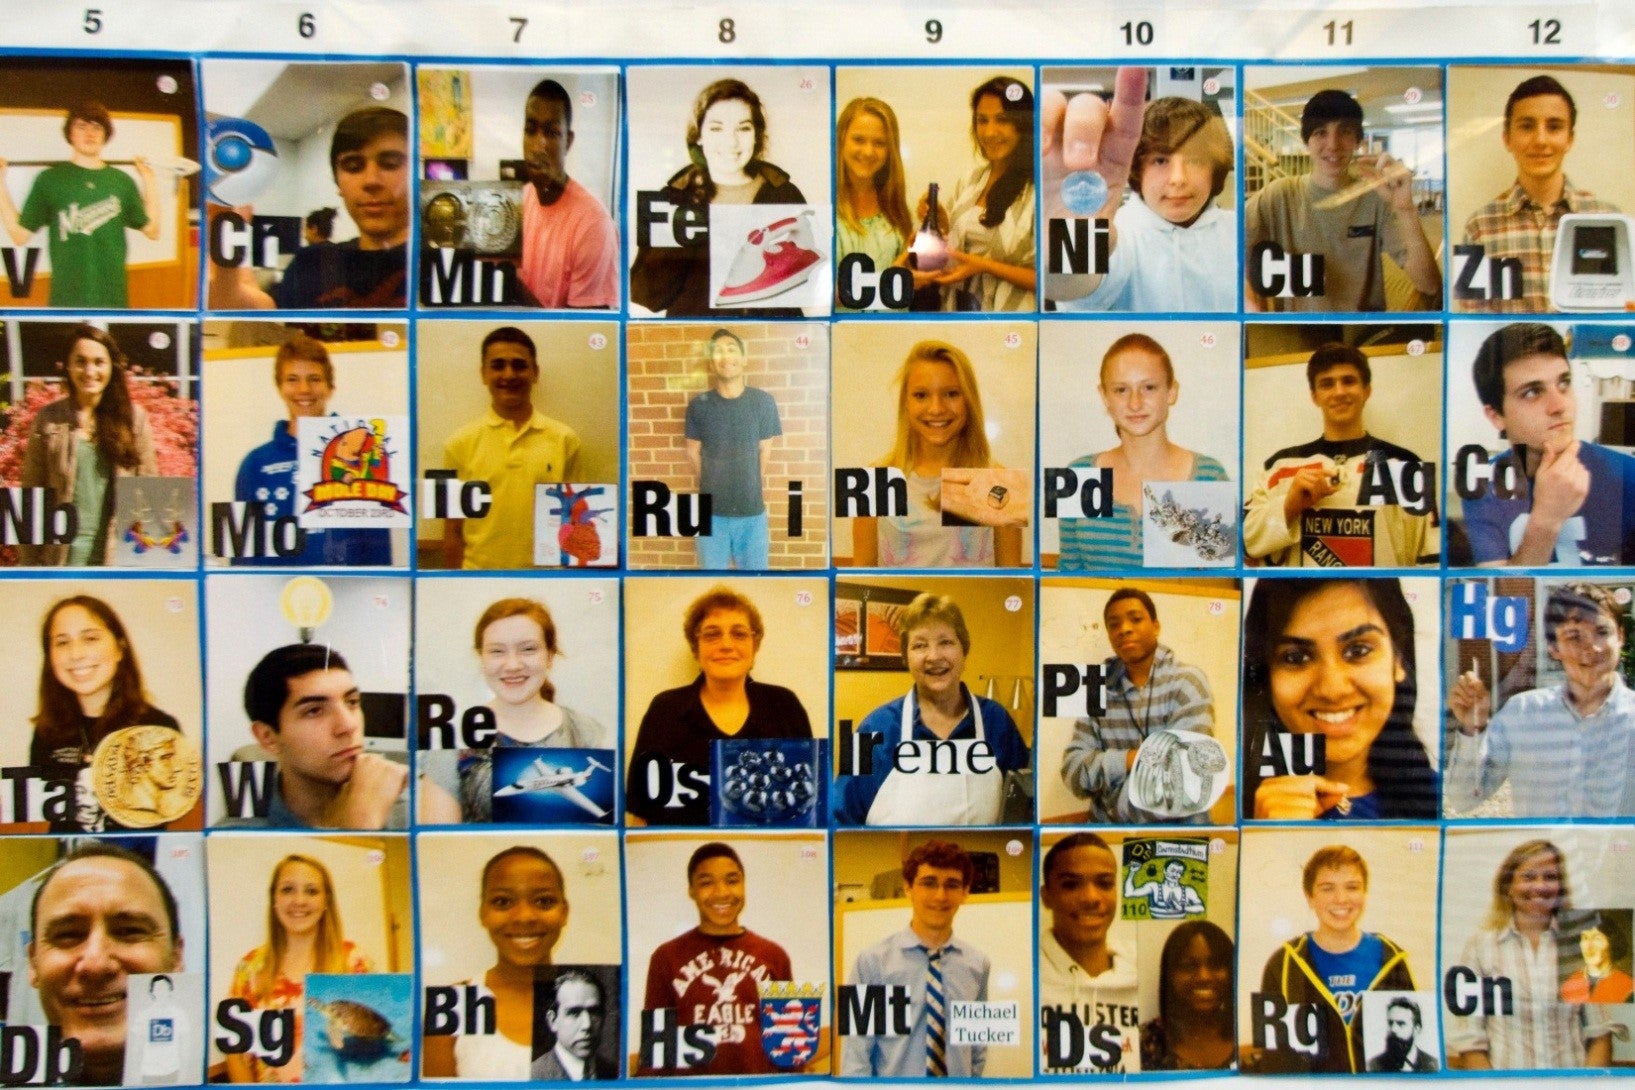 Periodic table with a picture of a school member in each element.